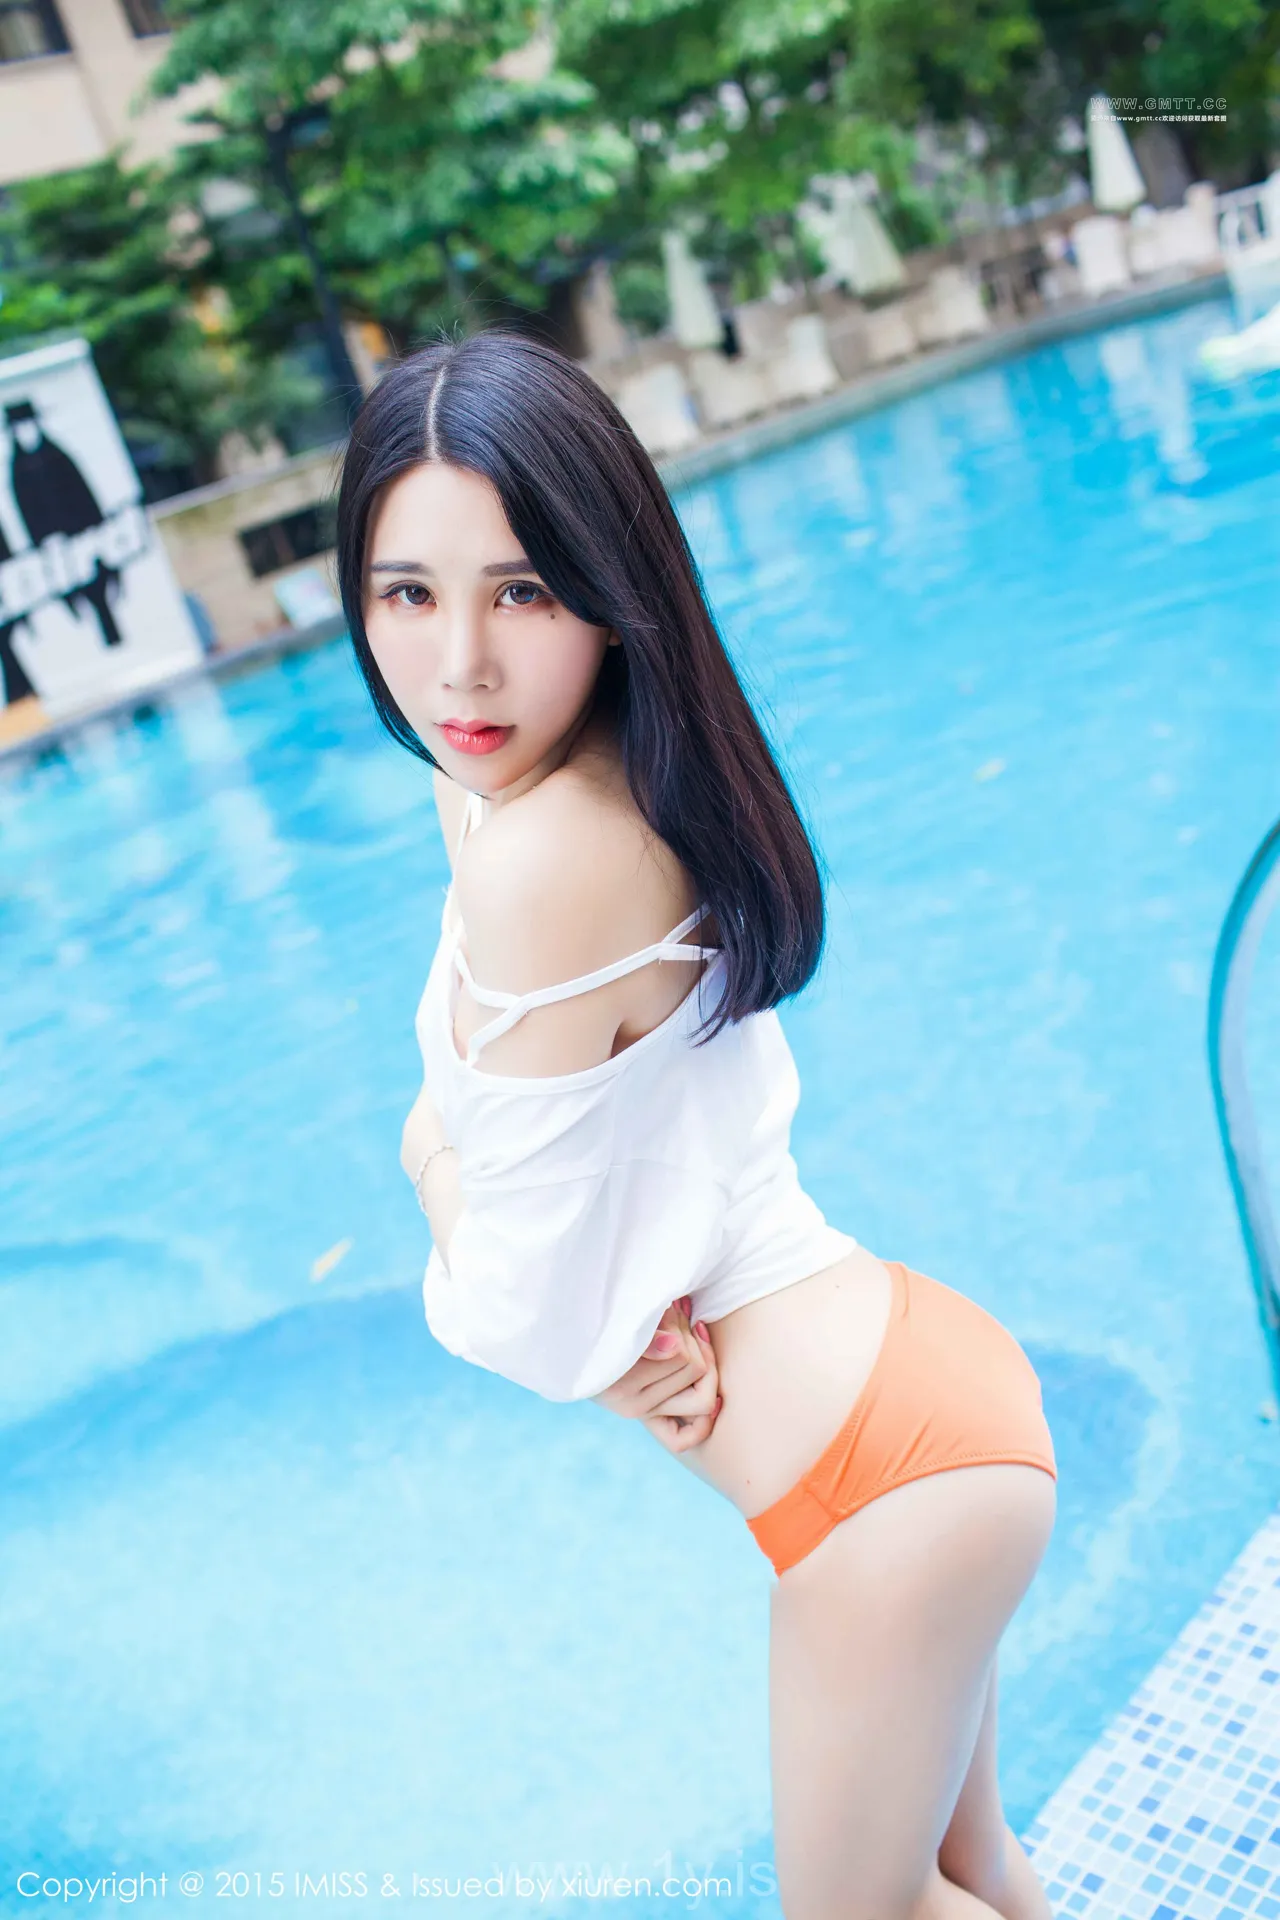 IMISS  NO.048 Fancy Chinese Hottie 林恩芝alu